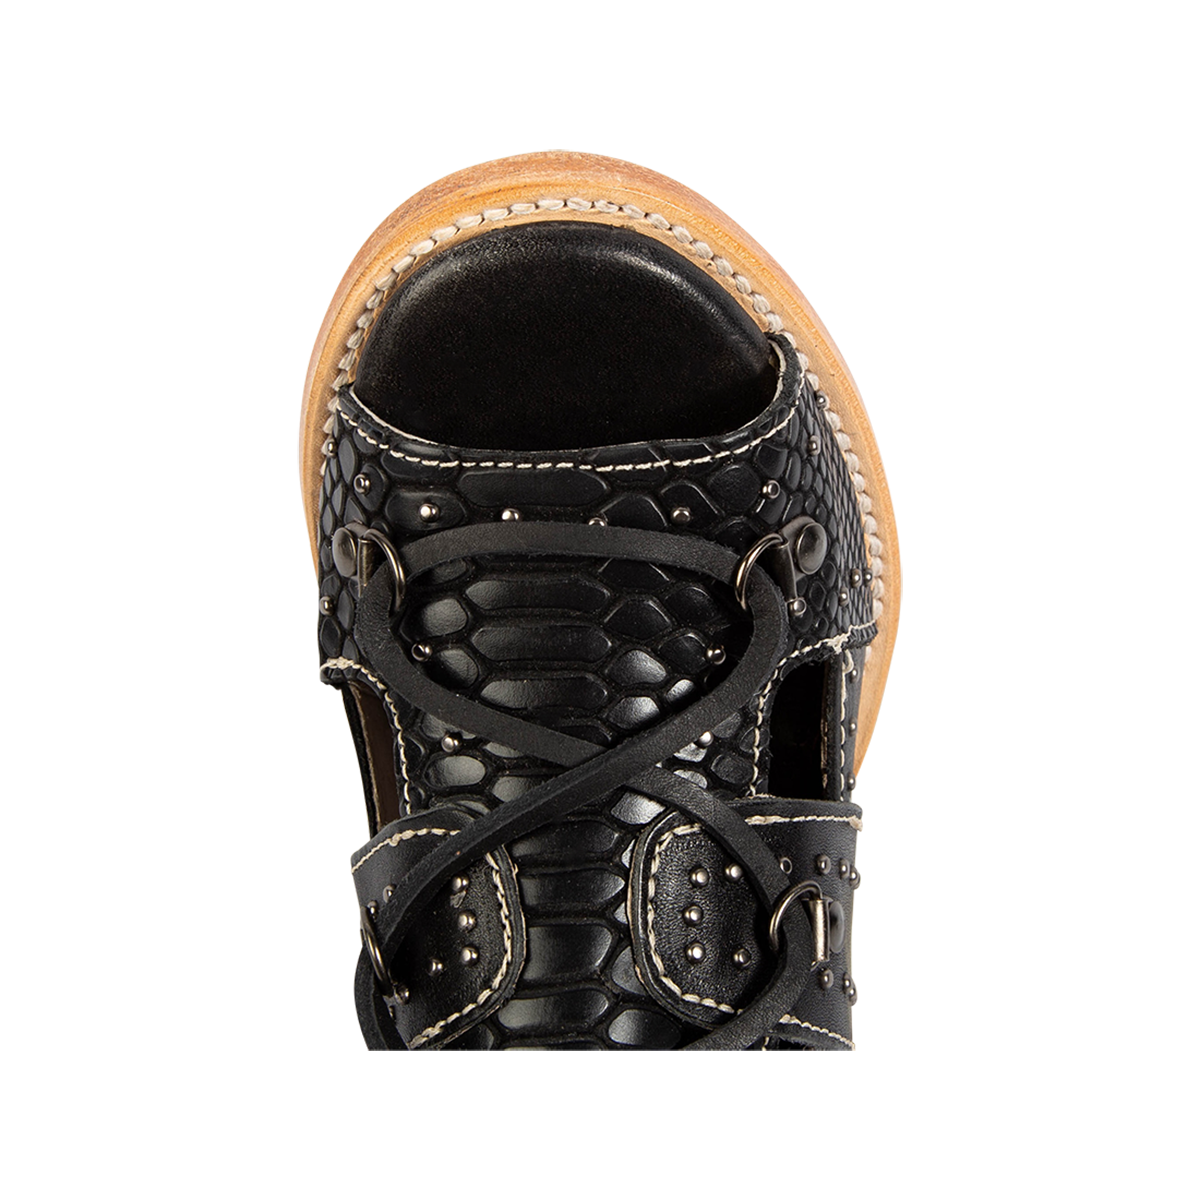 Top view showing an open, rounded toe and criss cross leather lacing on FREEBIRD women's Brandy black snake embossed leather sandal